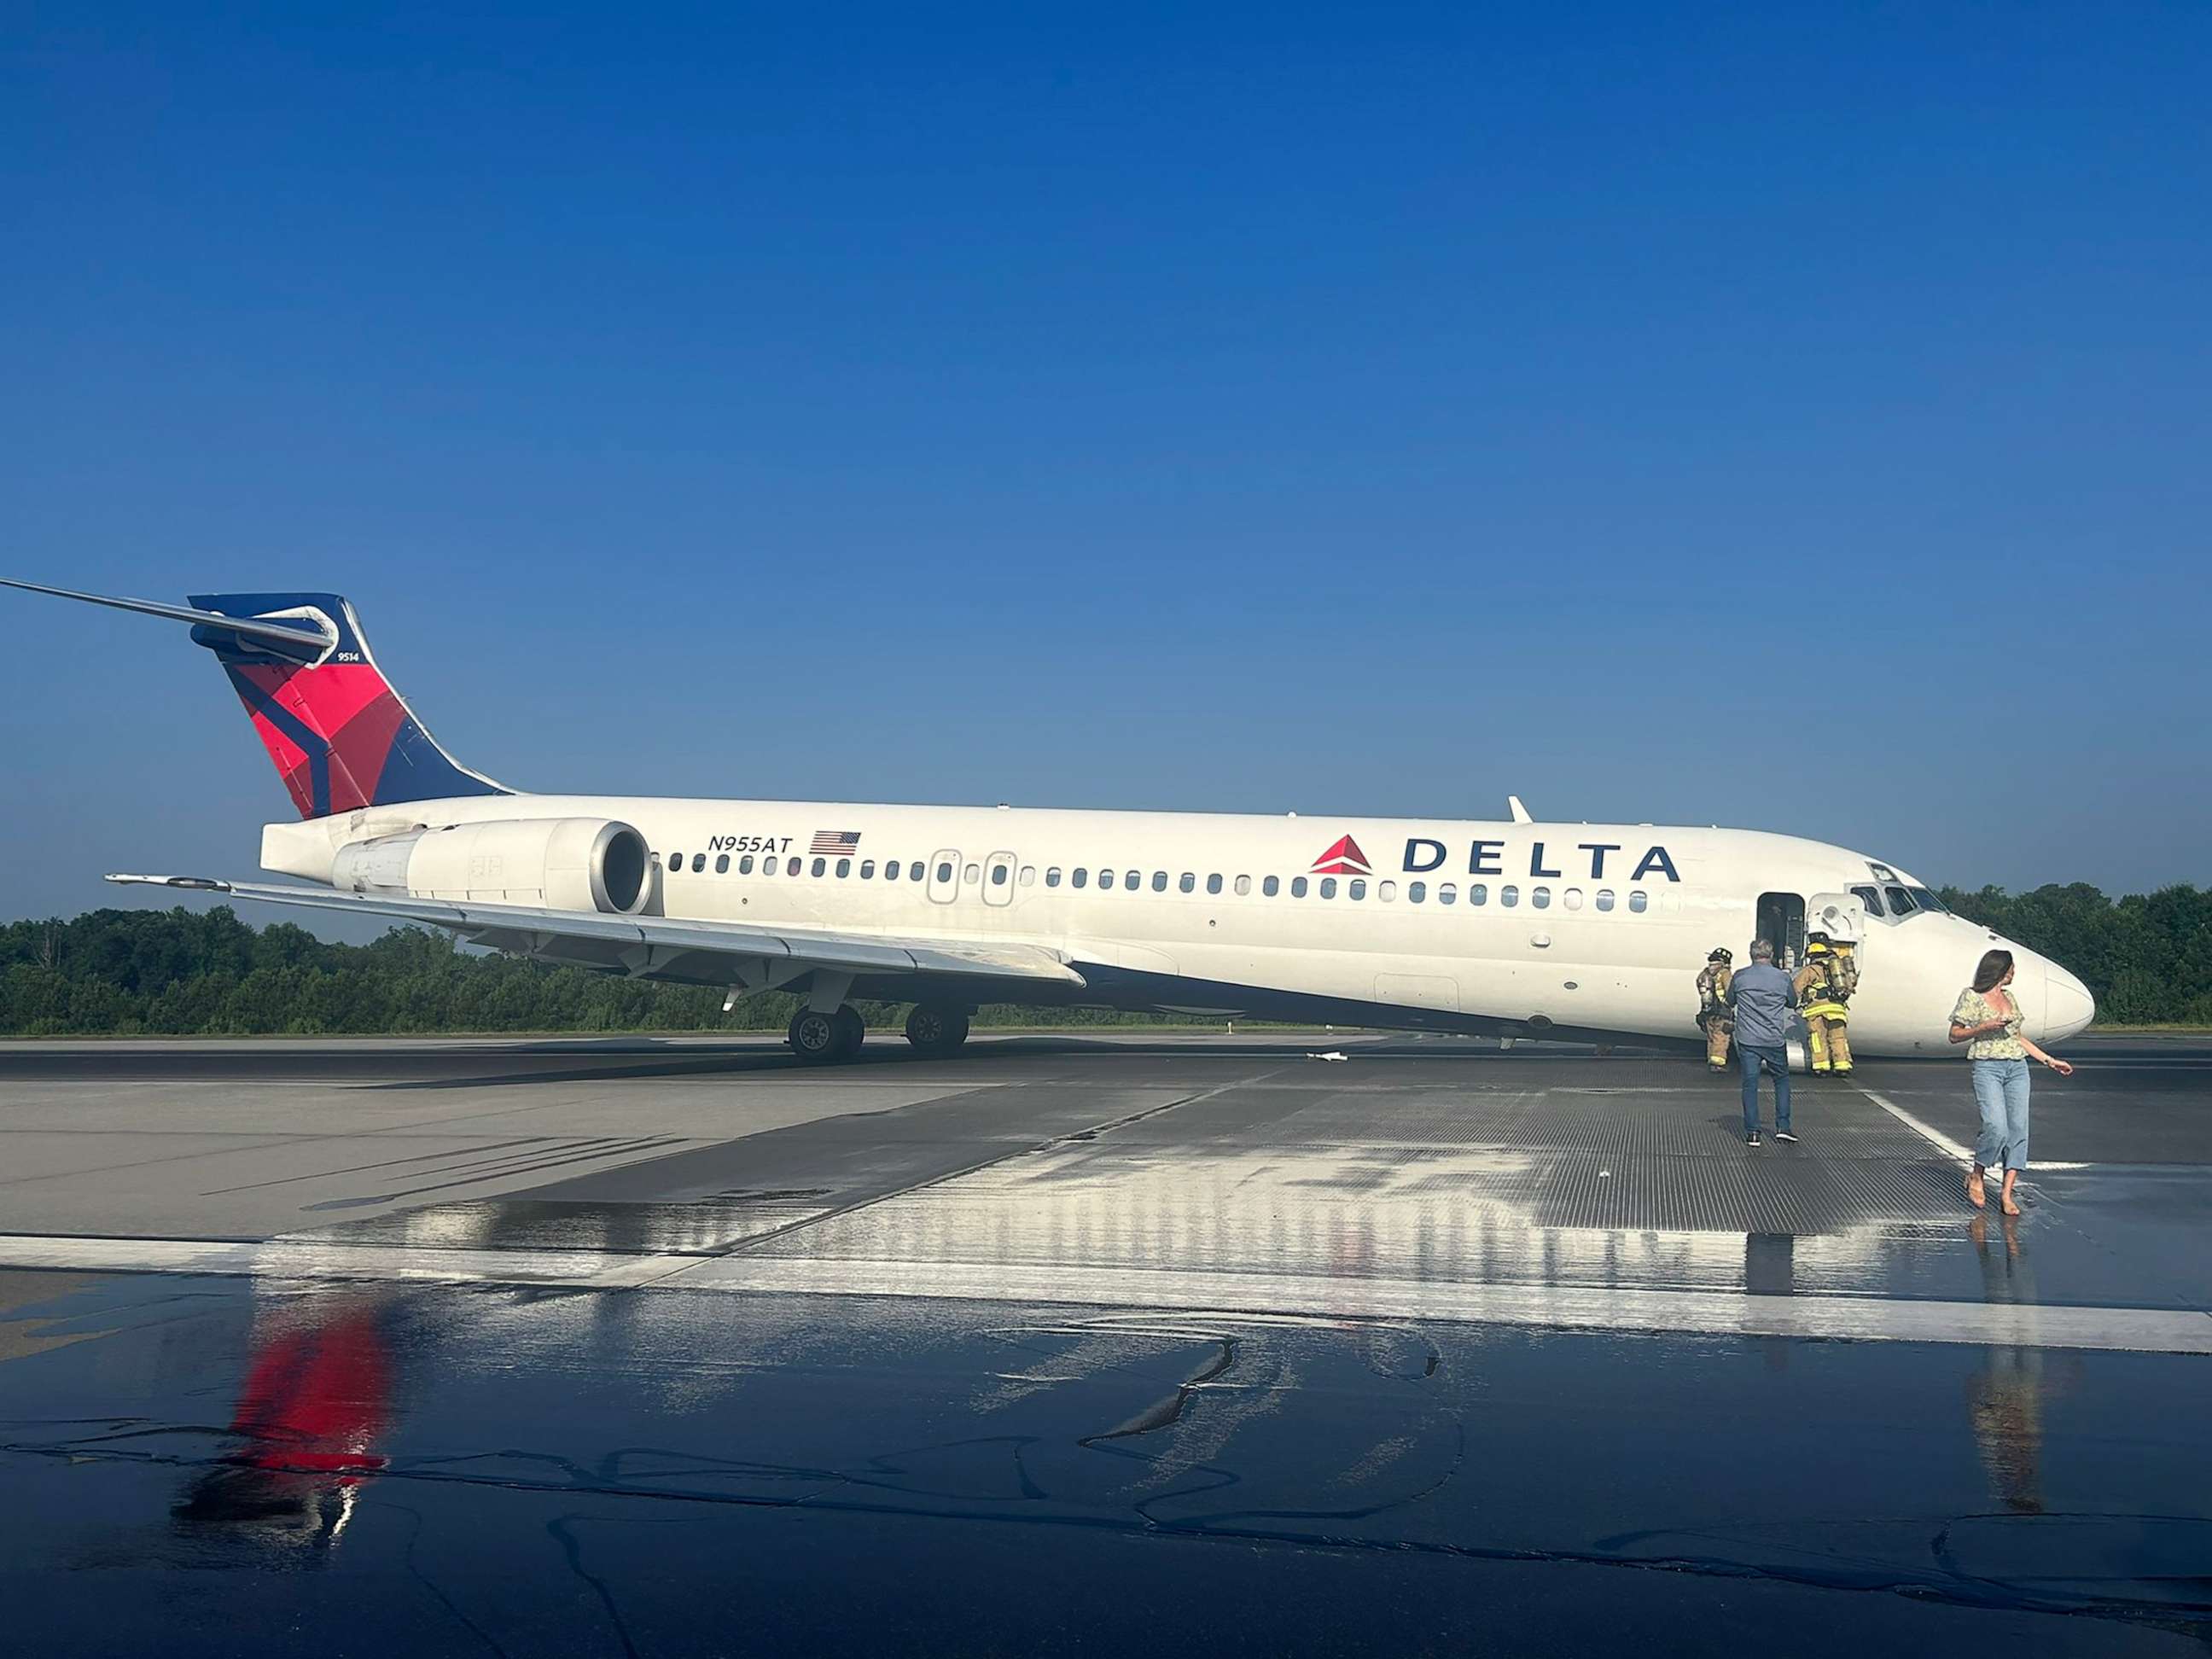 PHOTO: Firefighters attend to a passenger plane that landed at Charlotte Douglas International Airport in N.C. without its landing gear extended, June 28, 2023.